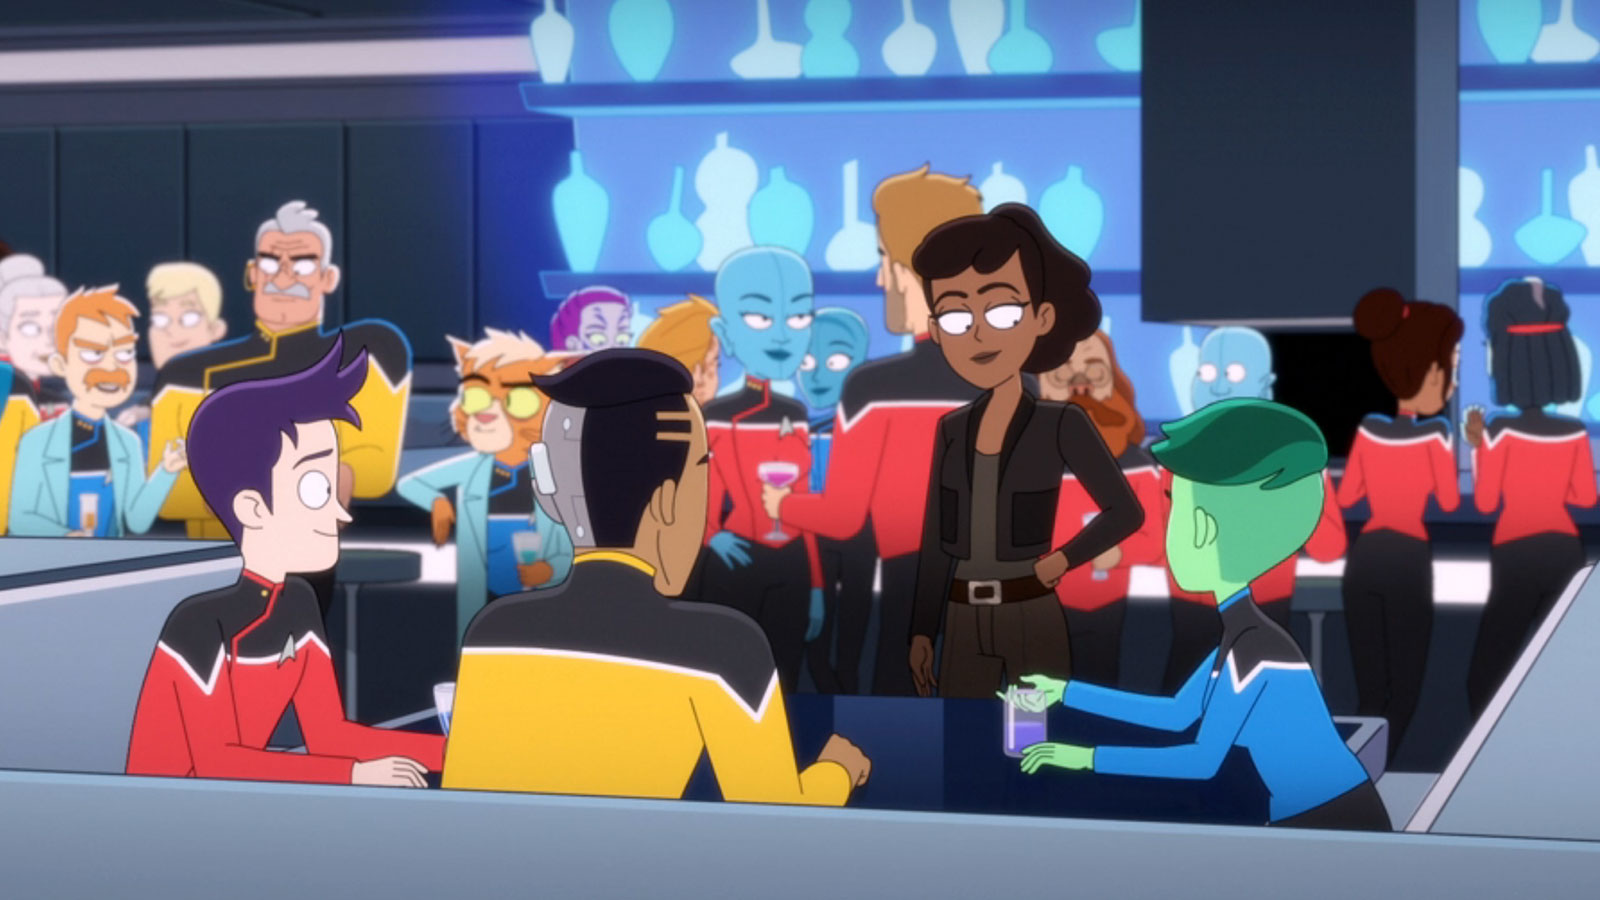 Star Trek: Lower Decks Season 3 finale “The Stars at Night” Review: Time for a family reunion